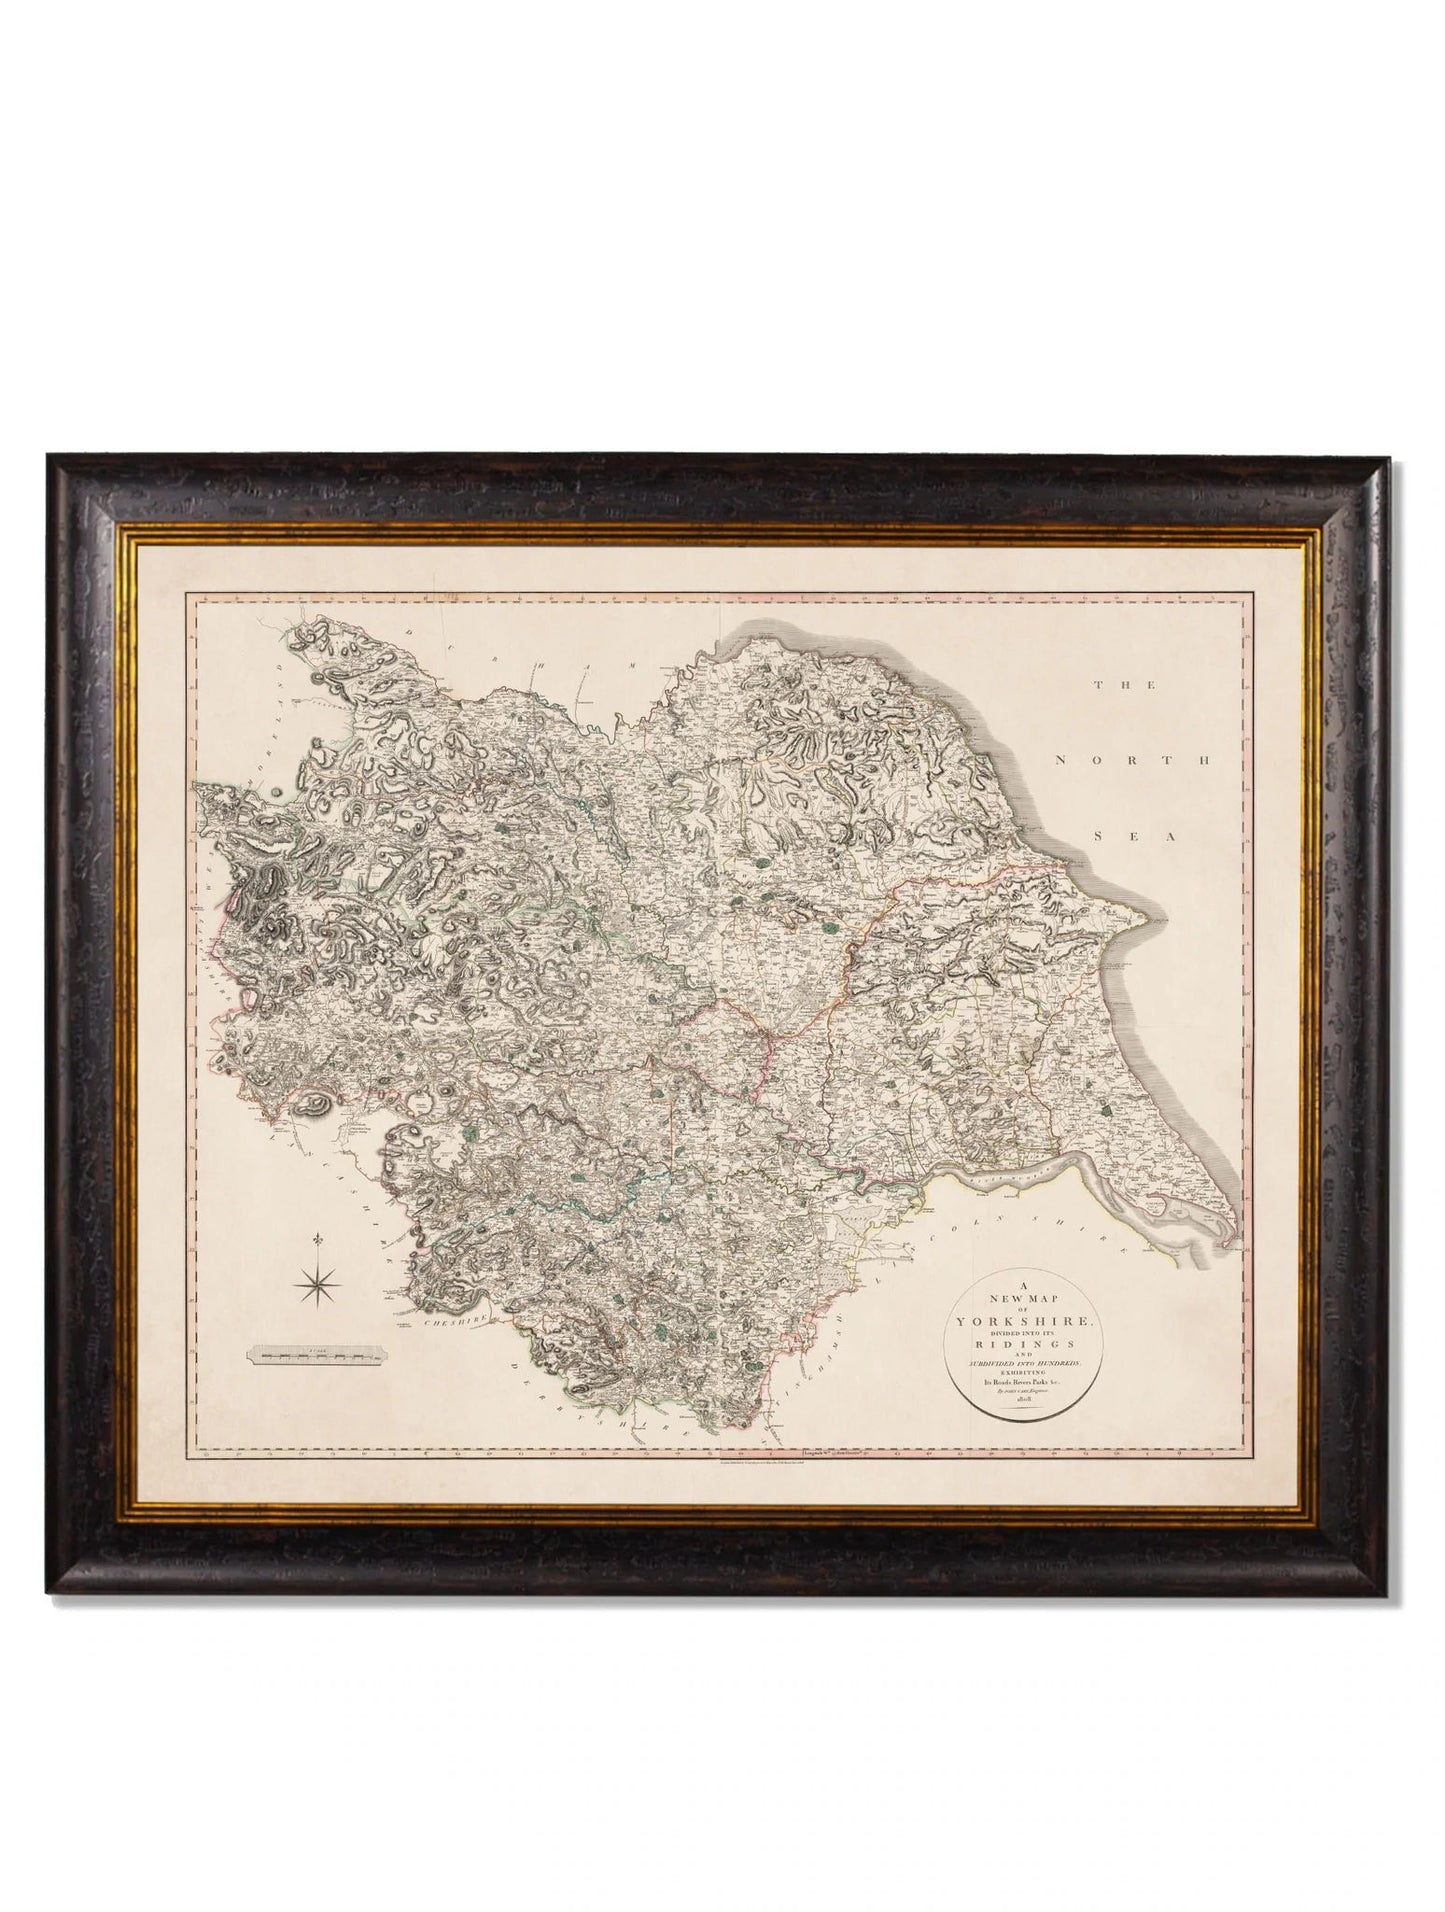 C.1806 County Maps Of England Frames for sale - Woodcock and Cavendish